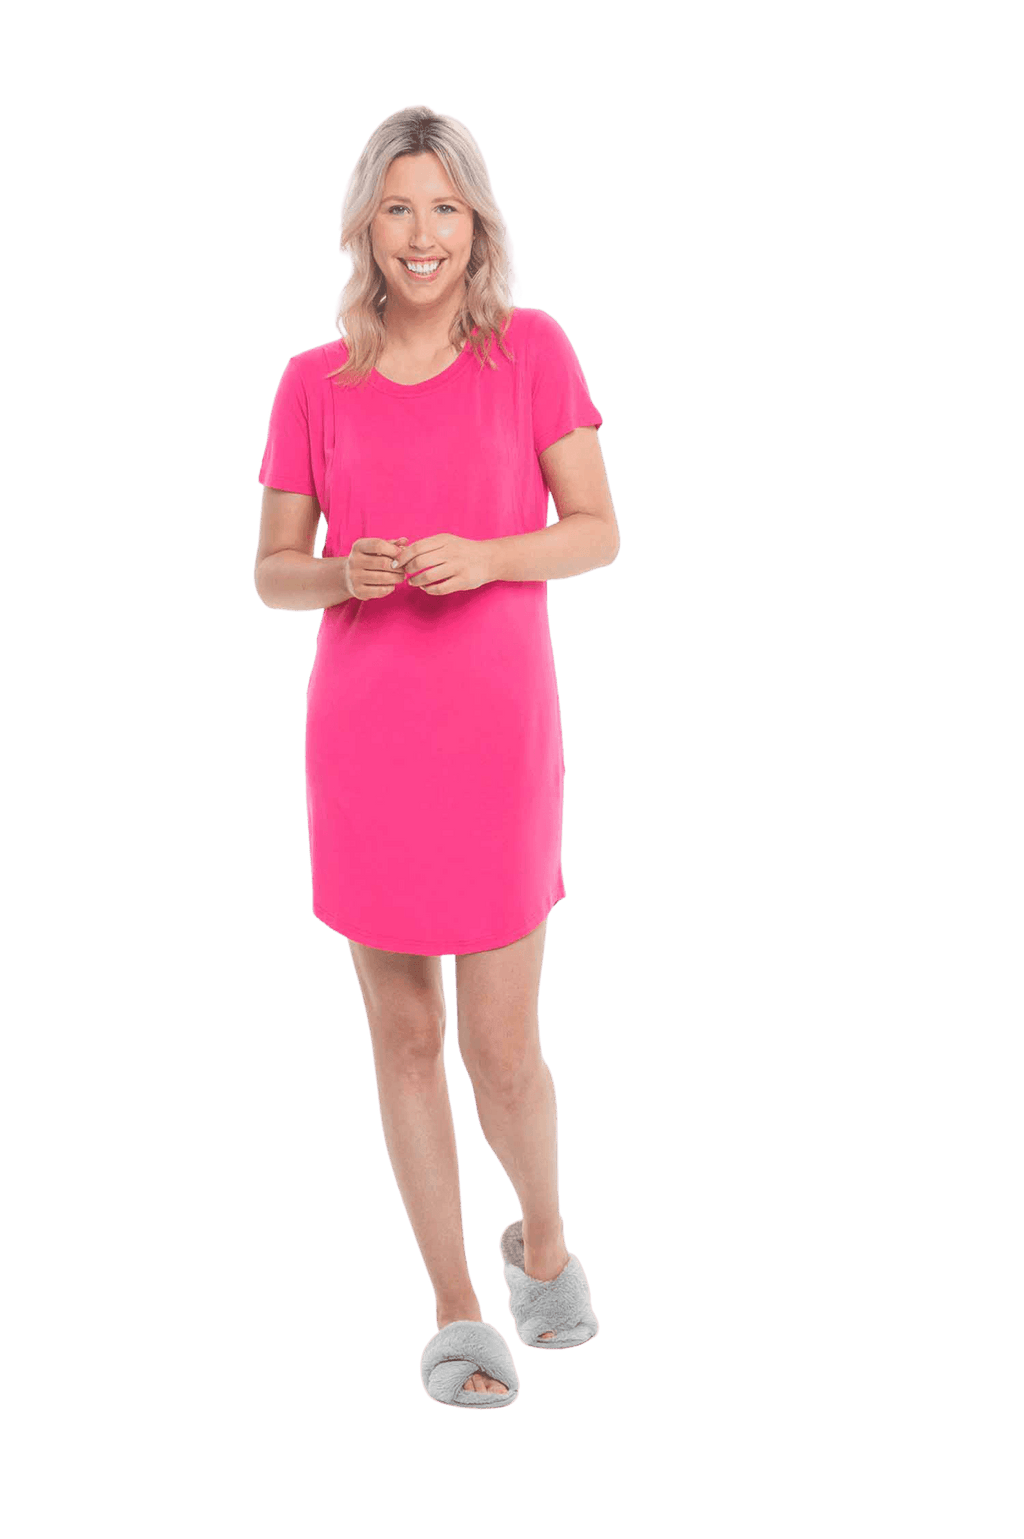 Blonde model facing camera wearing hot pink mid thigh length nightie, featuring rounded neckline, scooped hemline with short sleeves. Penny available in sizes 6-18